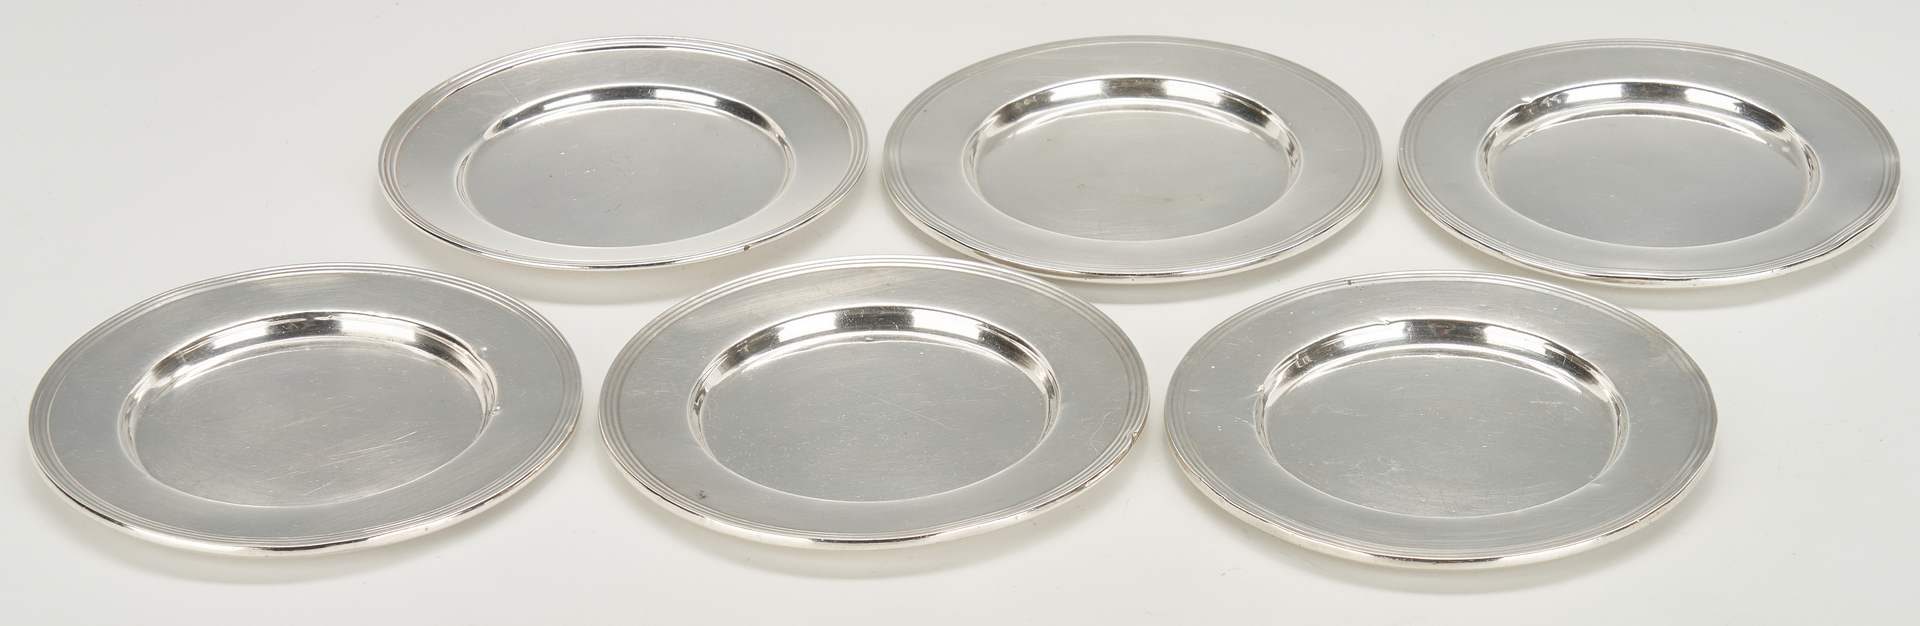 Lot 807: 11 pcs  Holloware: Bread Plates, Kirk candy dishes